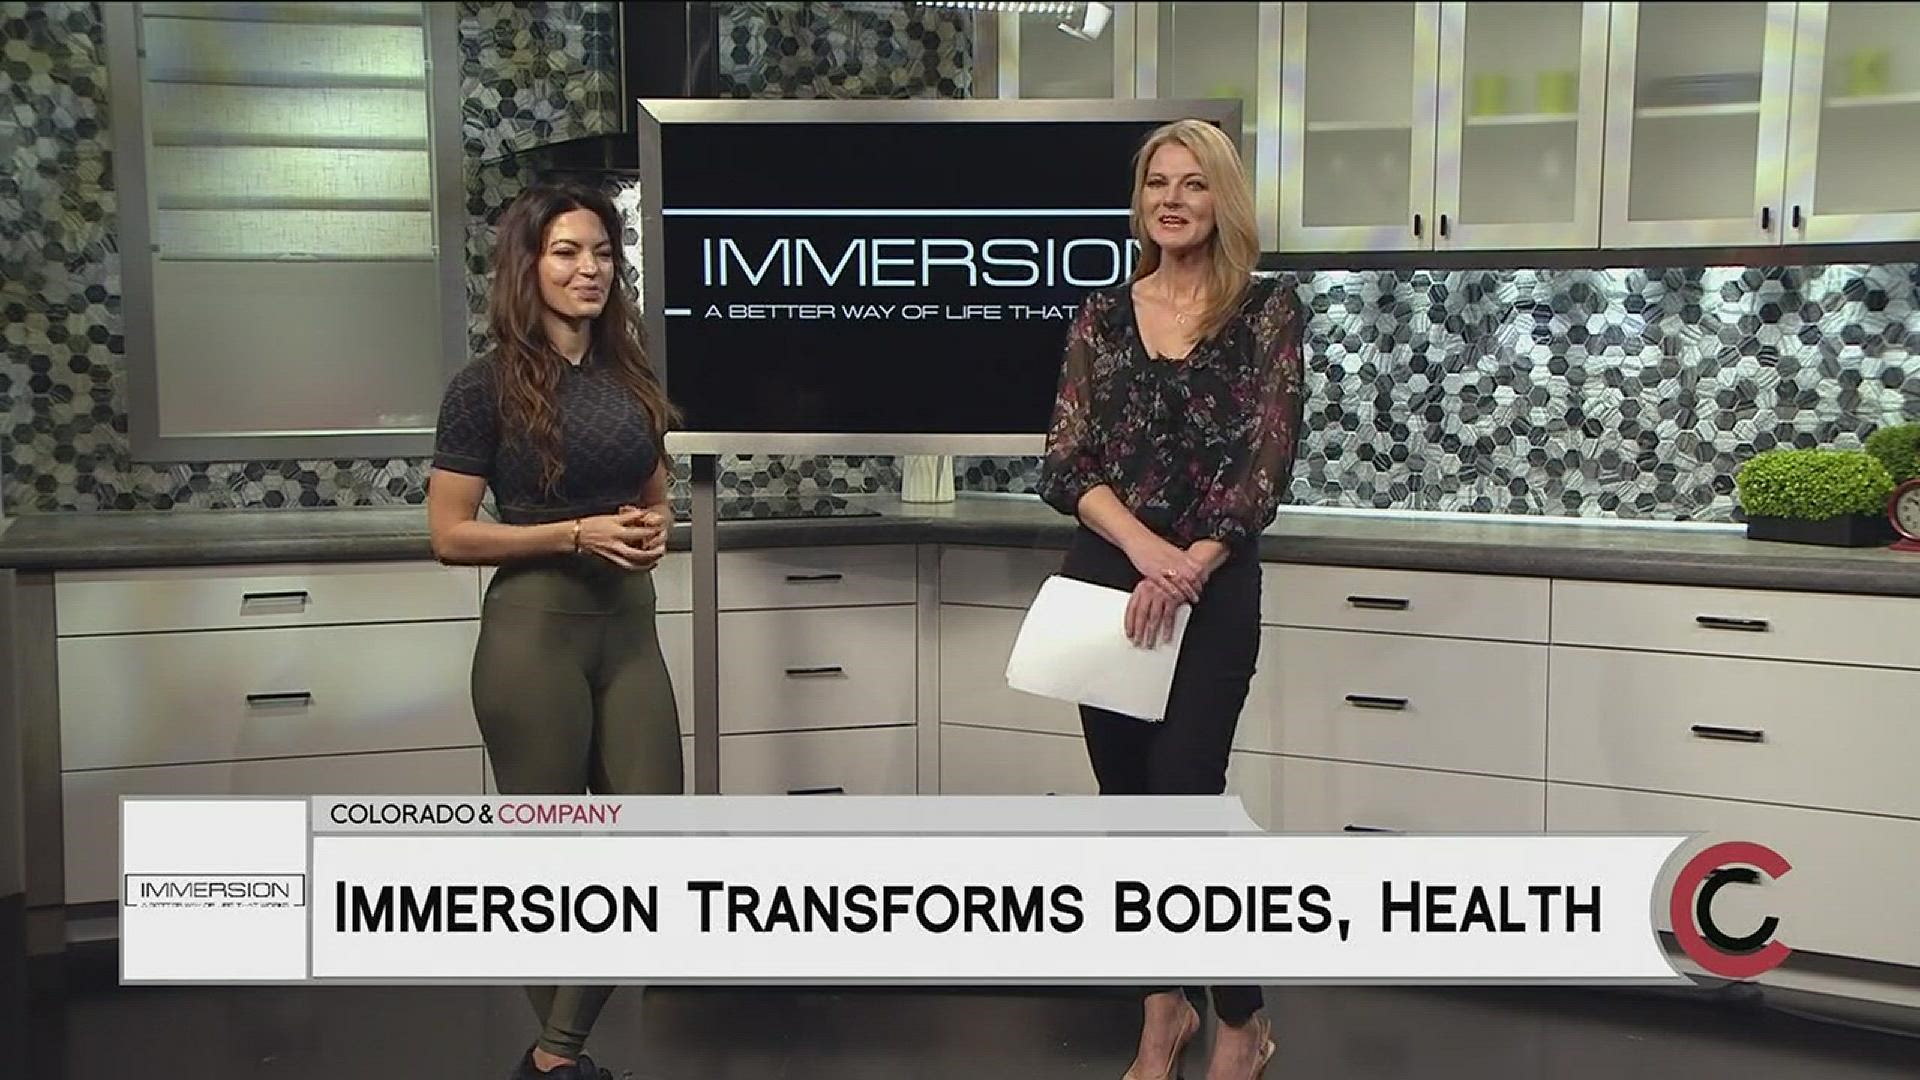 Join Ashley Shoultz and her team at Immersion to find the support and results you’ve always wanted. Check out www.ThisIsImmersion.com and enter code FIT 4 GOOD and get 25% off the first month of membership, and a free 30-minute phone consultation with Ashley. This offer is for new members only. 
THIS INTERVIEW HAS COMMERCIAL CONTENT. PRODUCTS AND SERVICES FEATURED APPEAR AS PAID ADVERTISING.